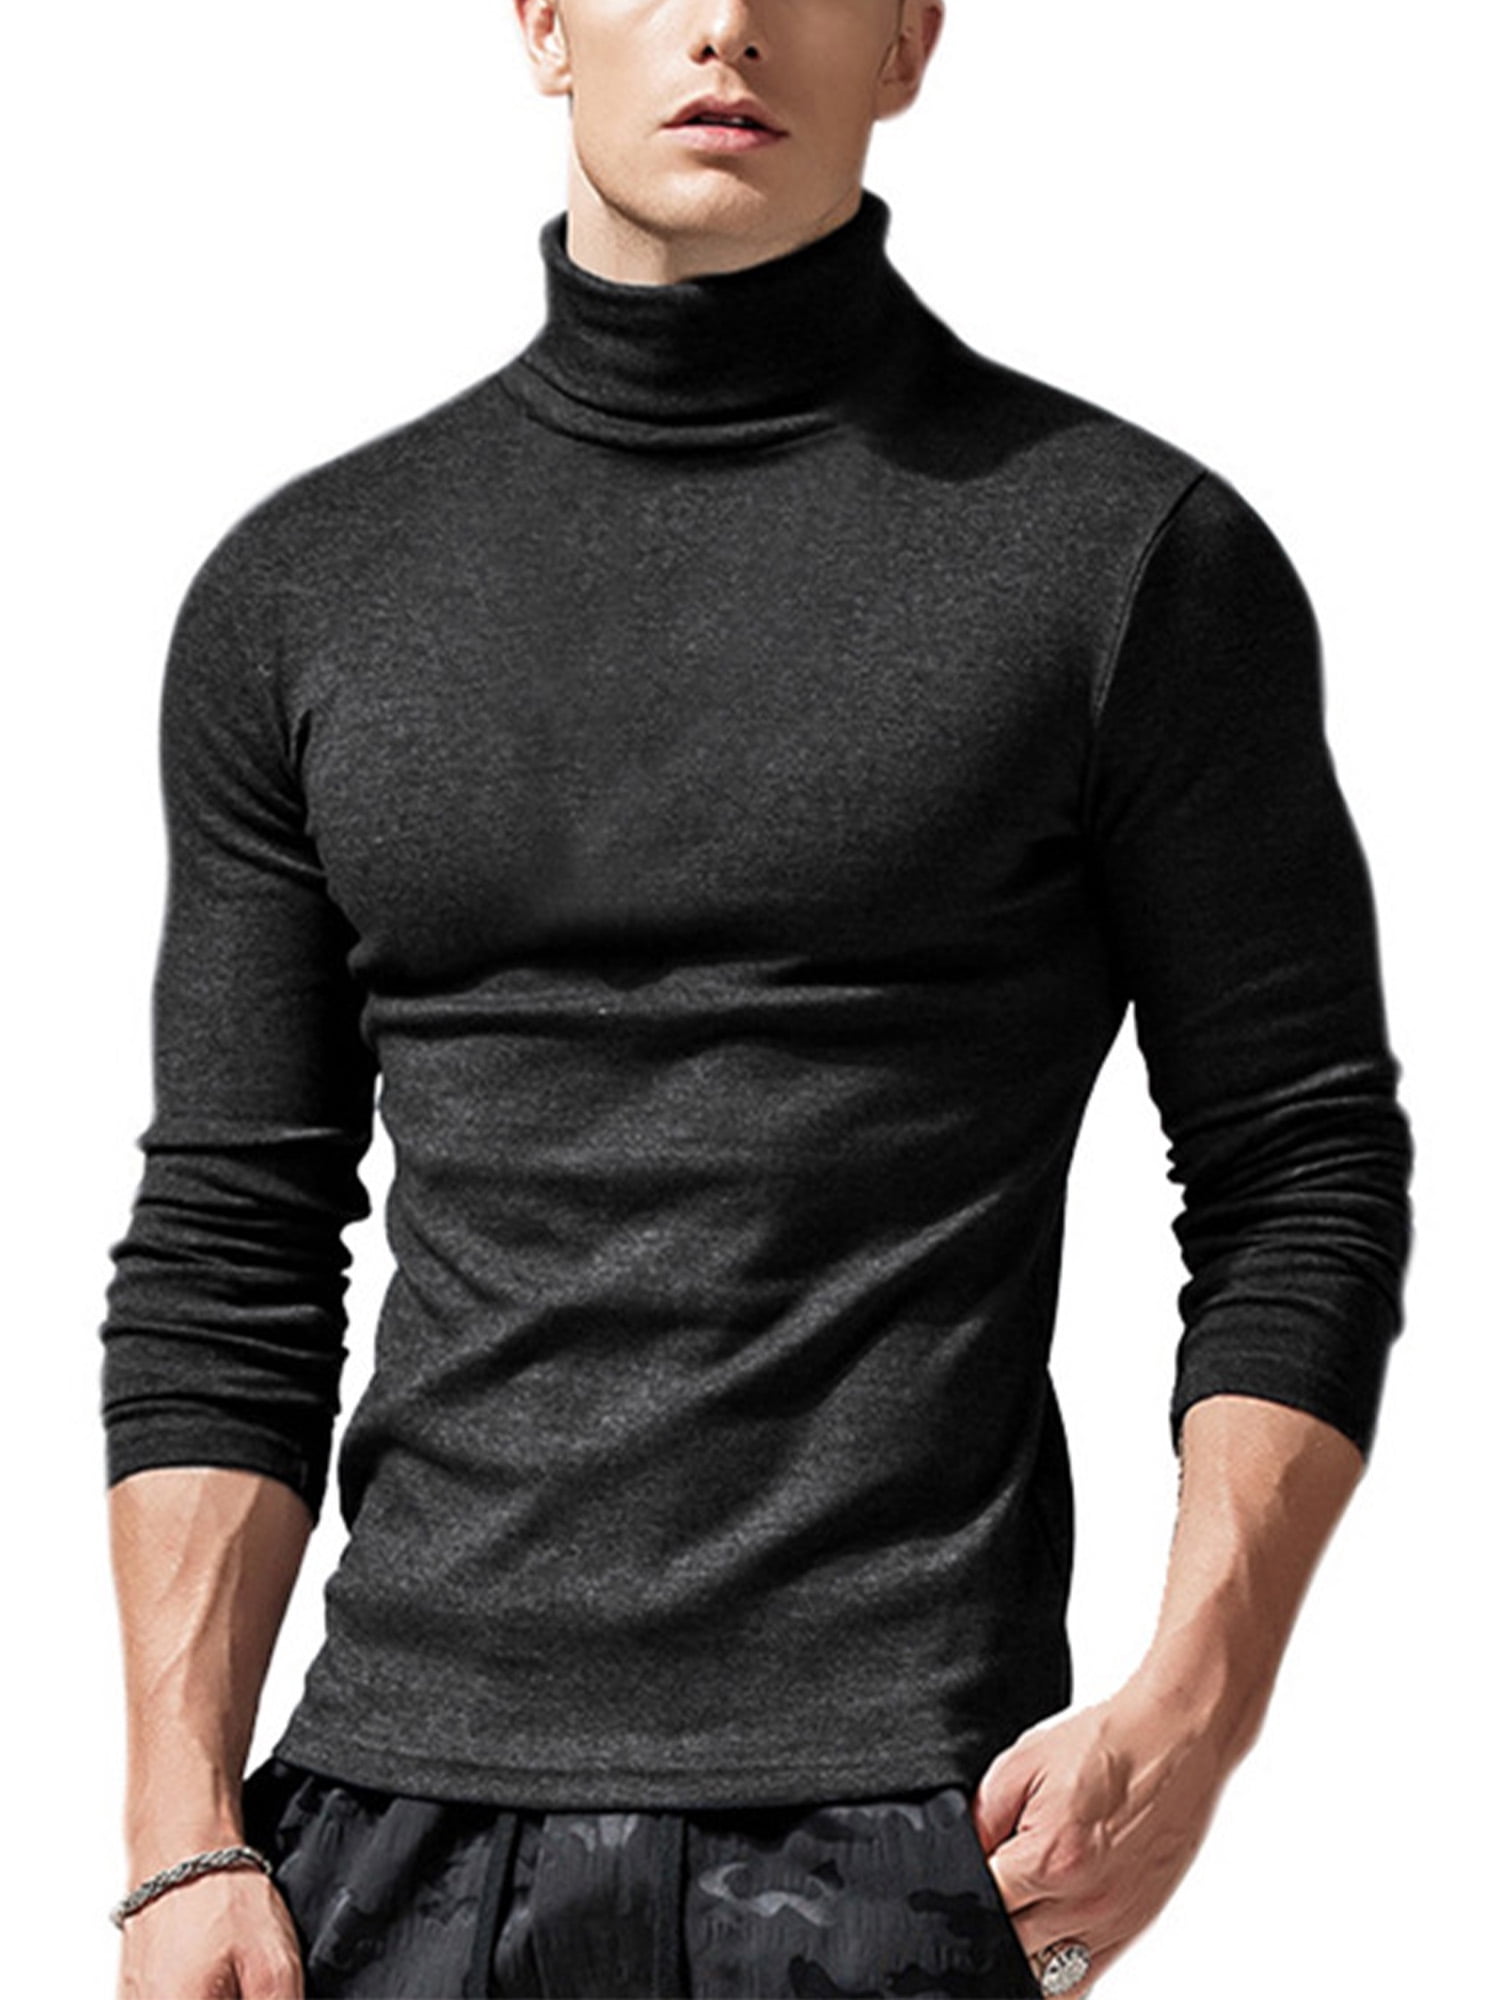 Zimaes-Men Long-Sleeve Fit Mock Neck Solid Knitted Pullover Sweater